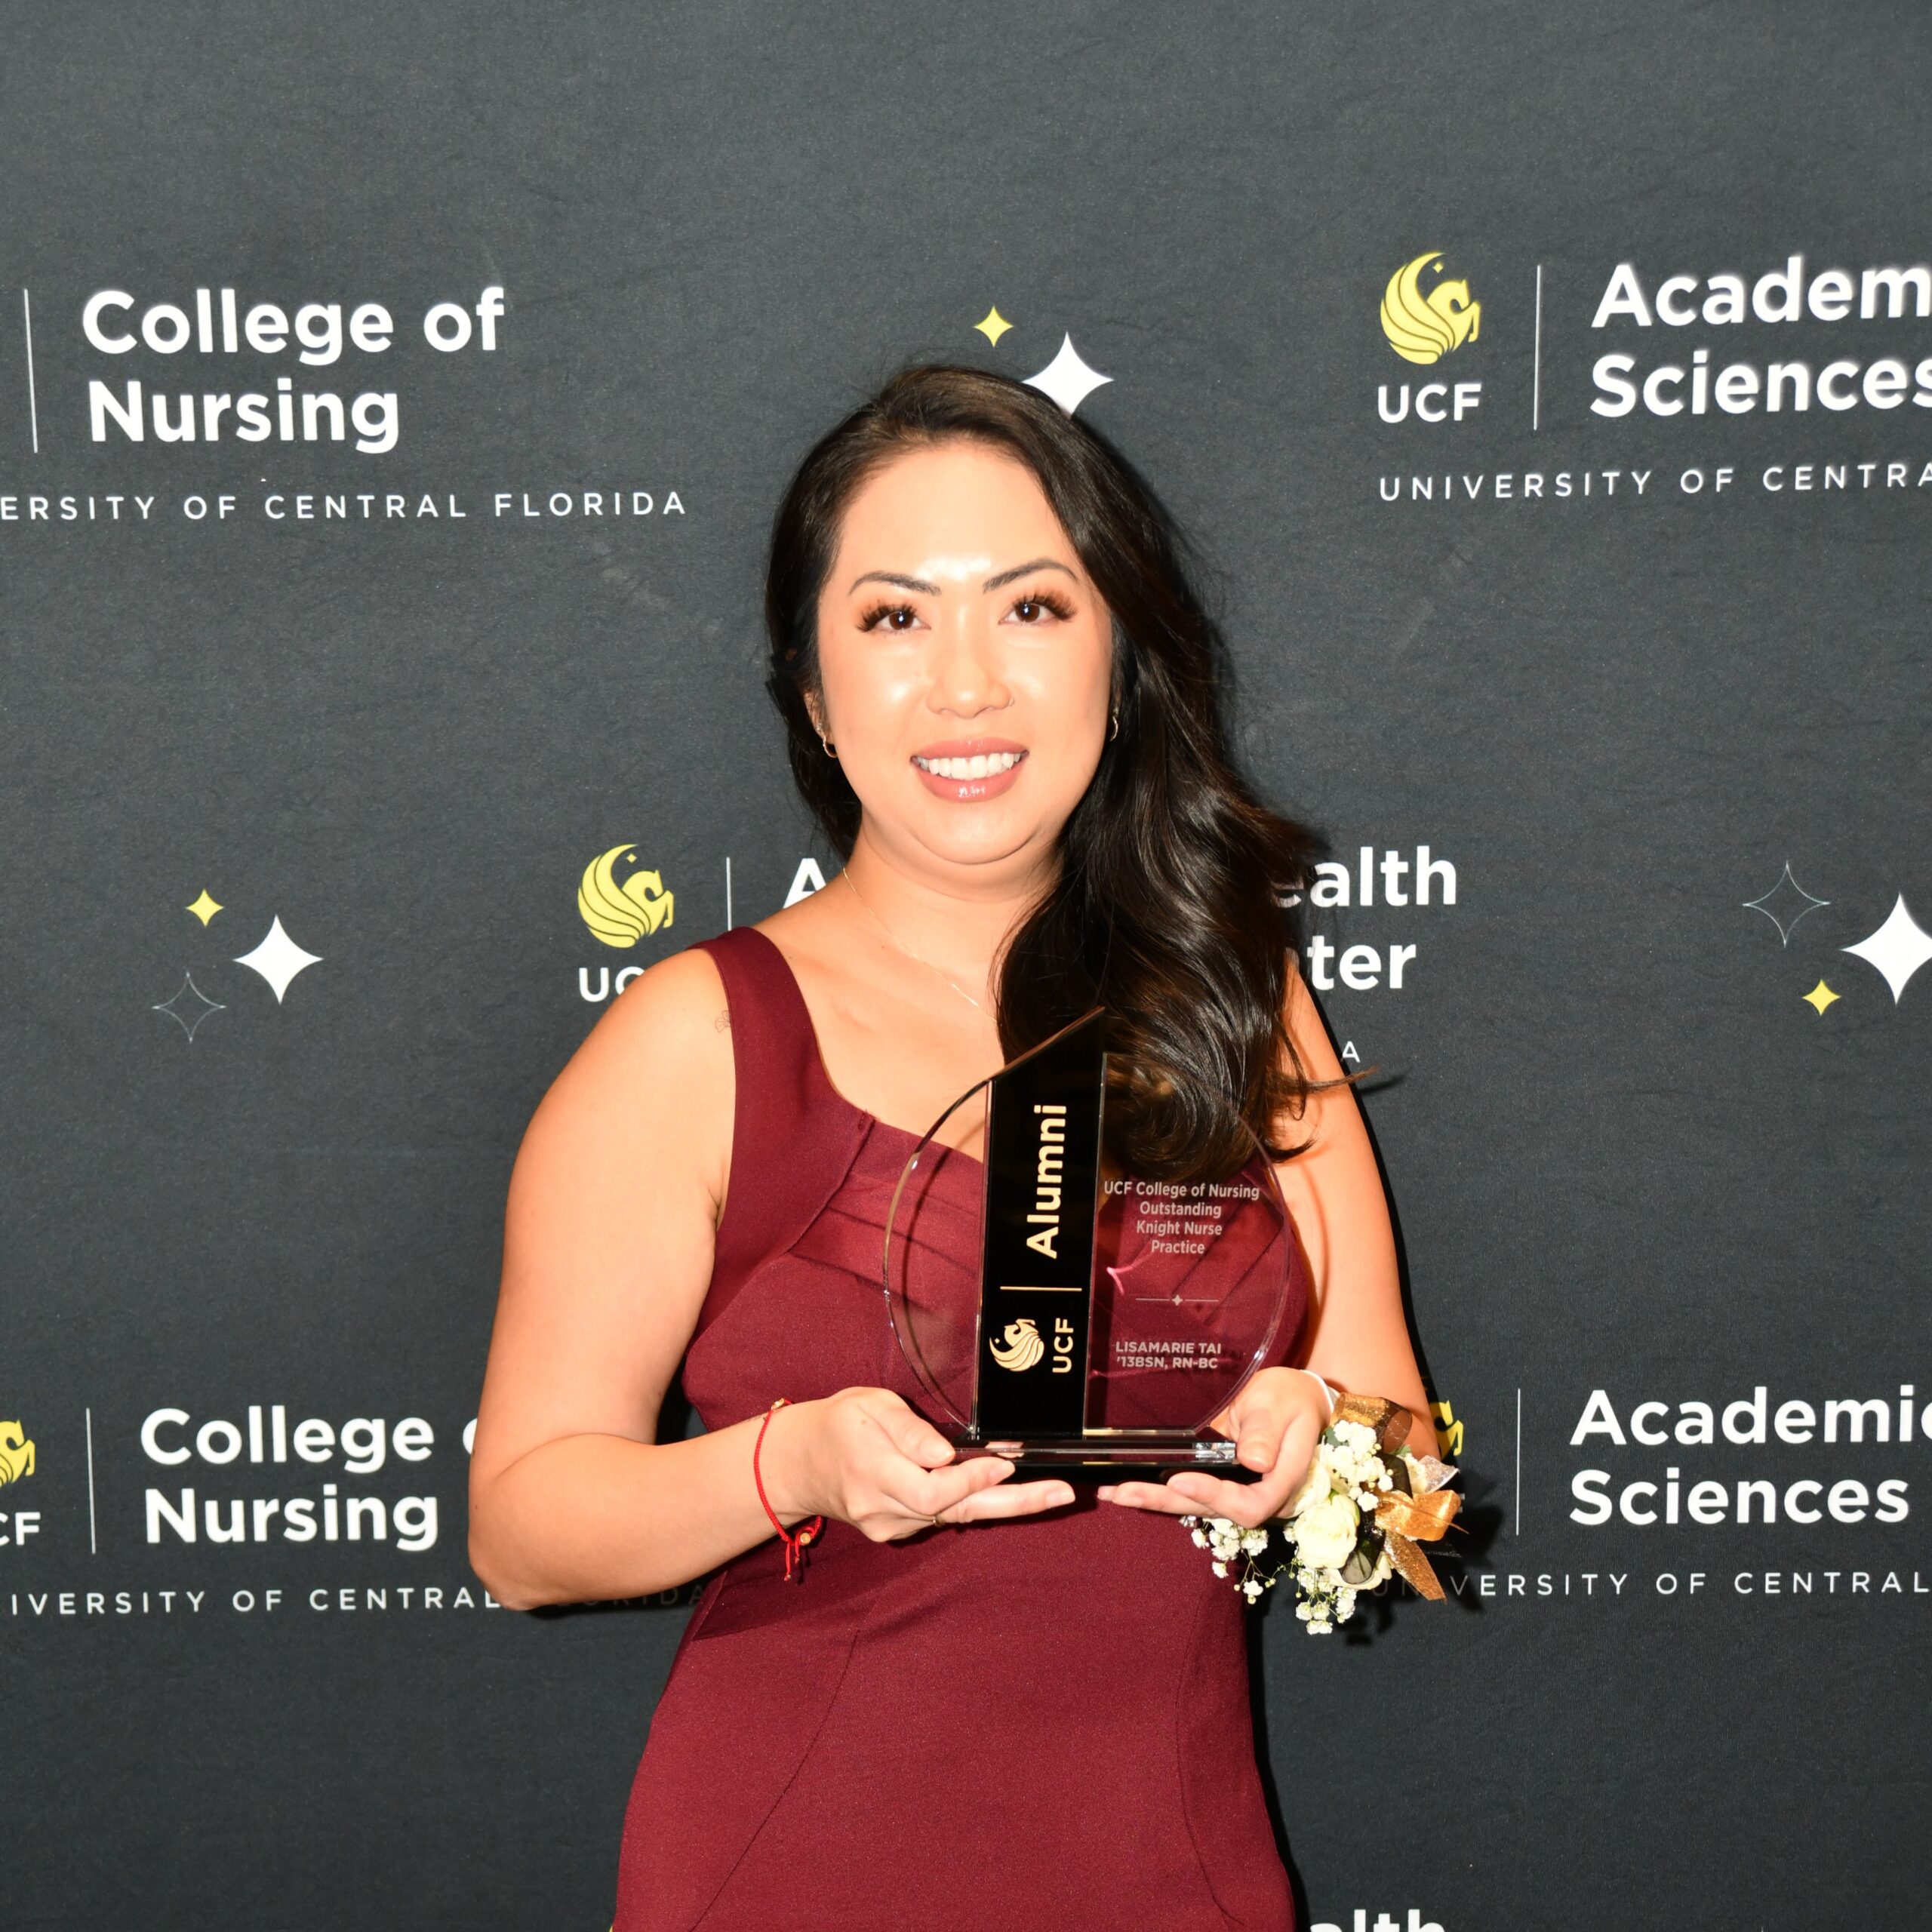 Lisamarie Tai holding a crystal UCF Alumni award in front of a UCF College of Nursing banner